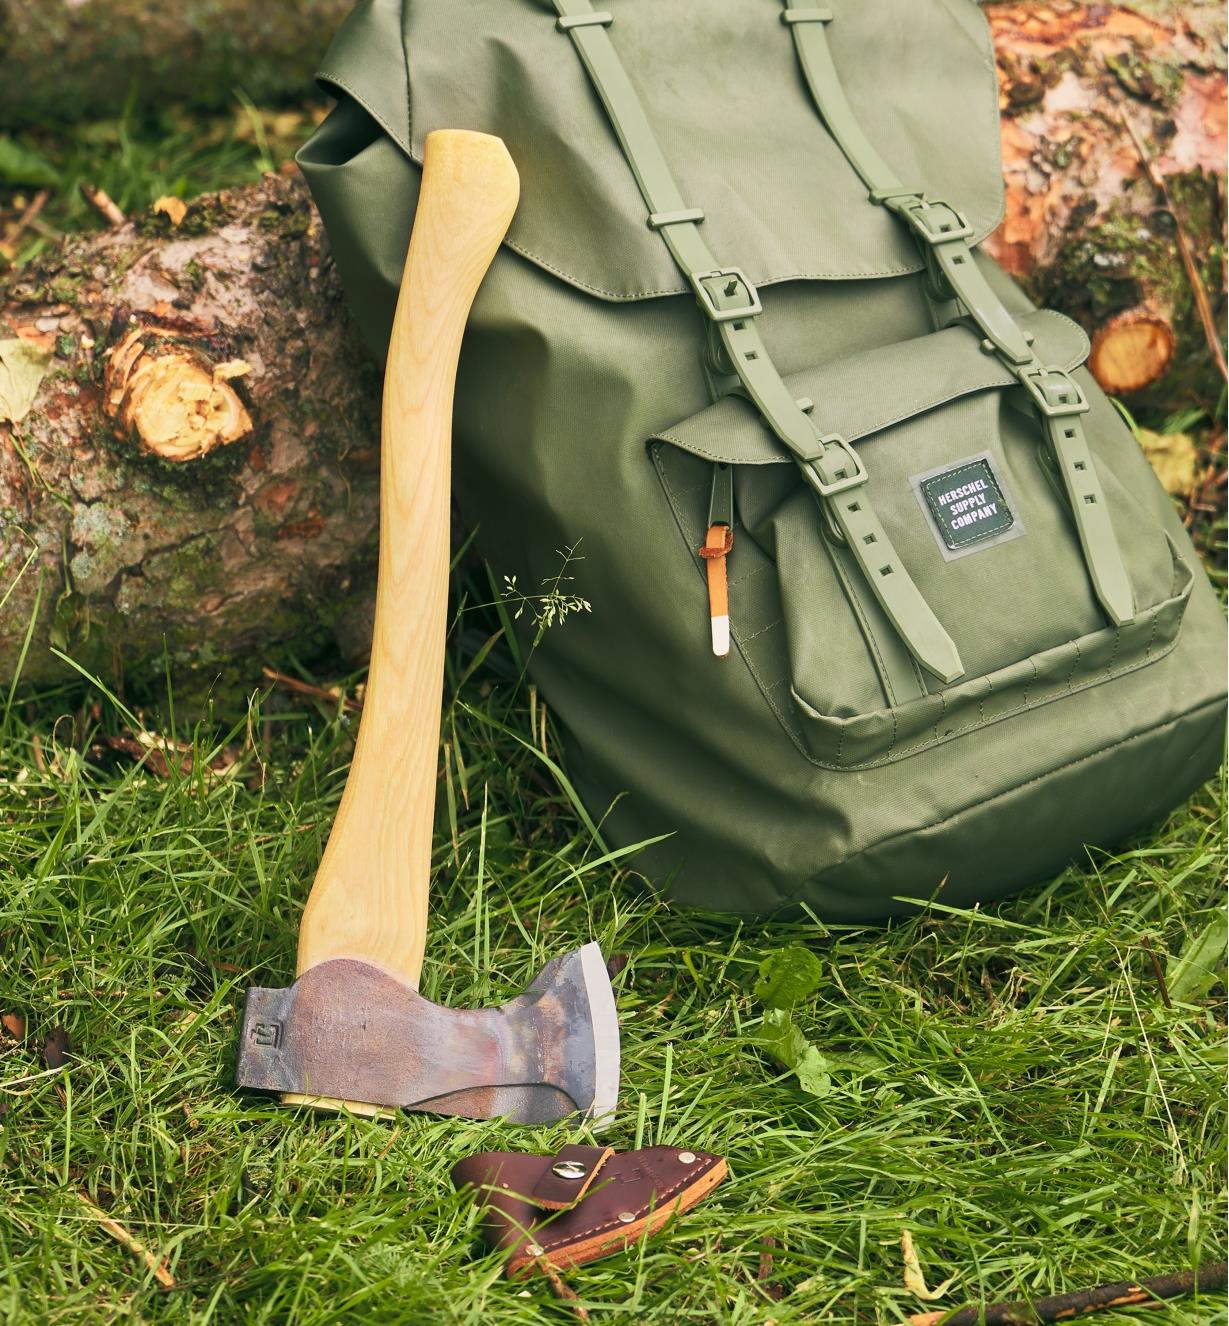 A pack axe leaning against a backpack